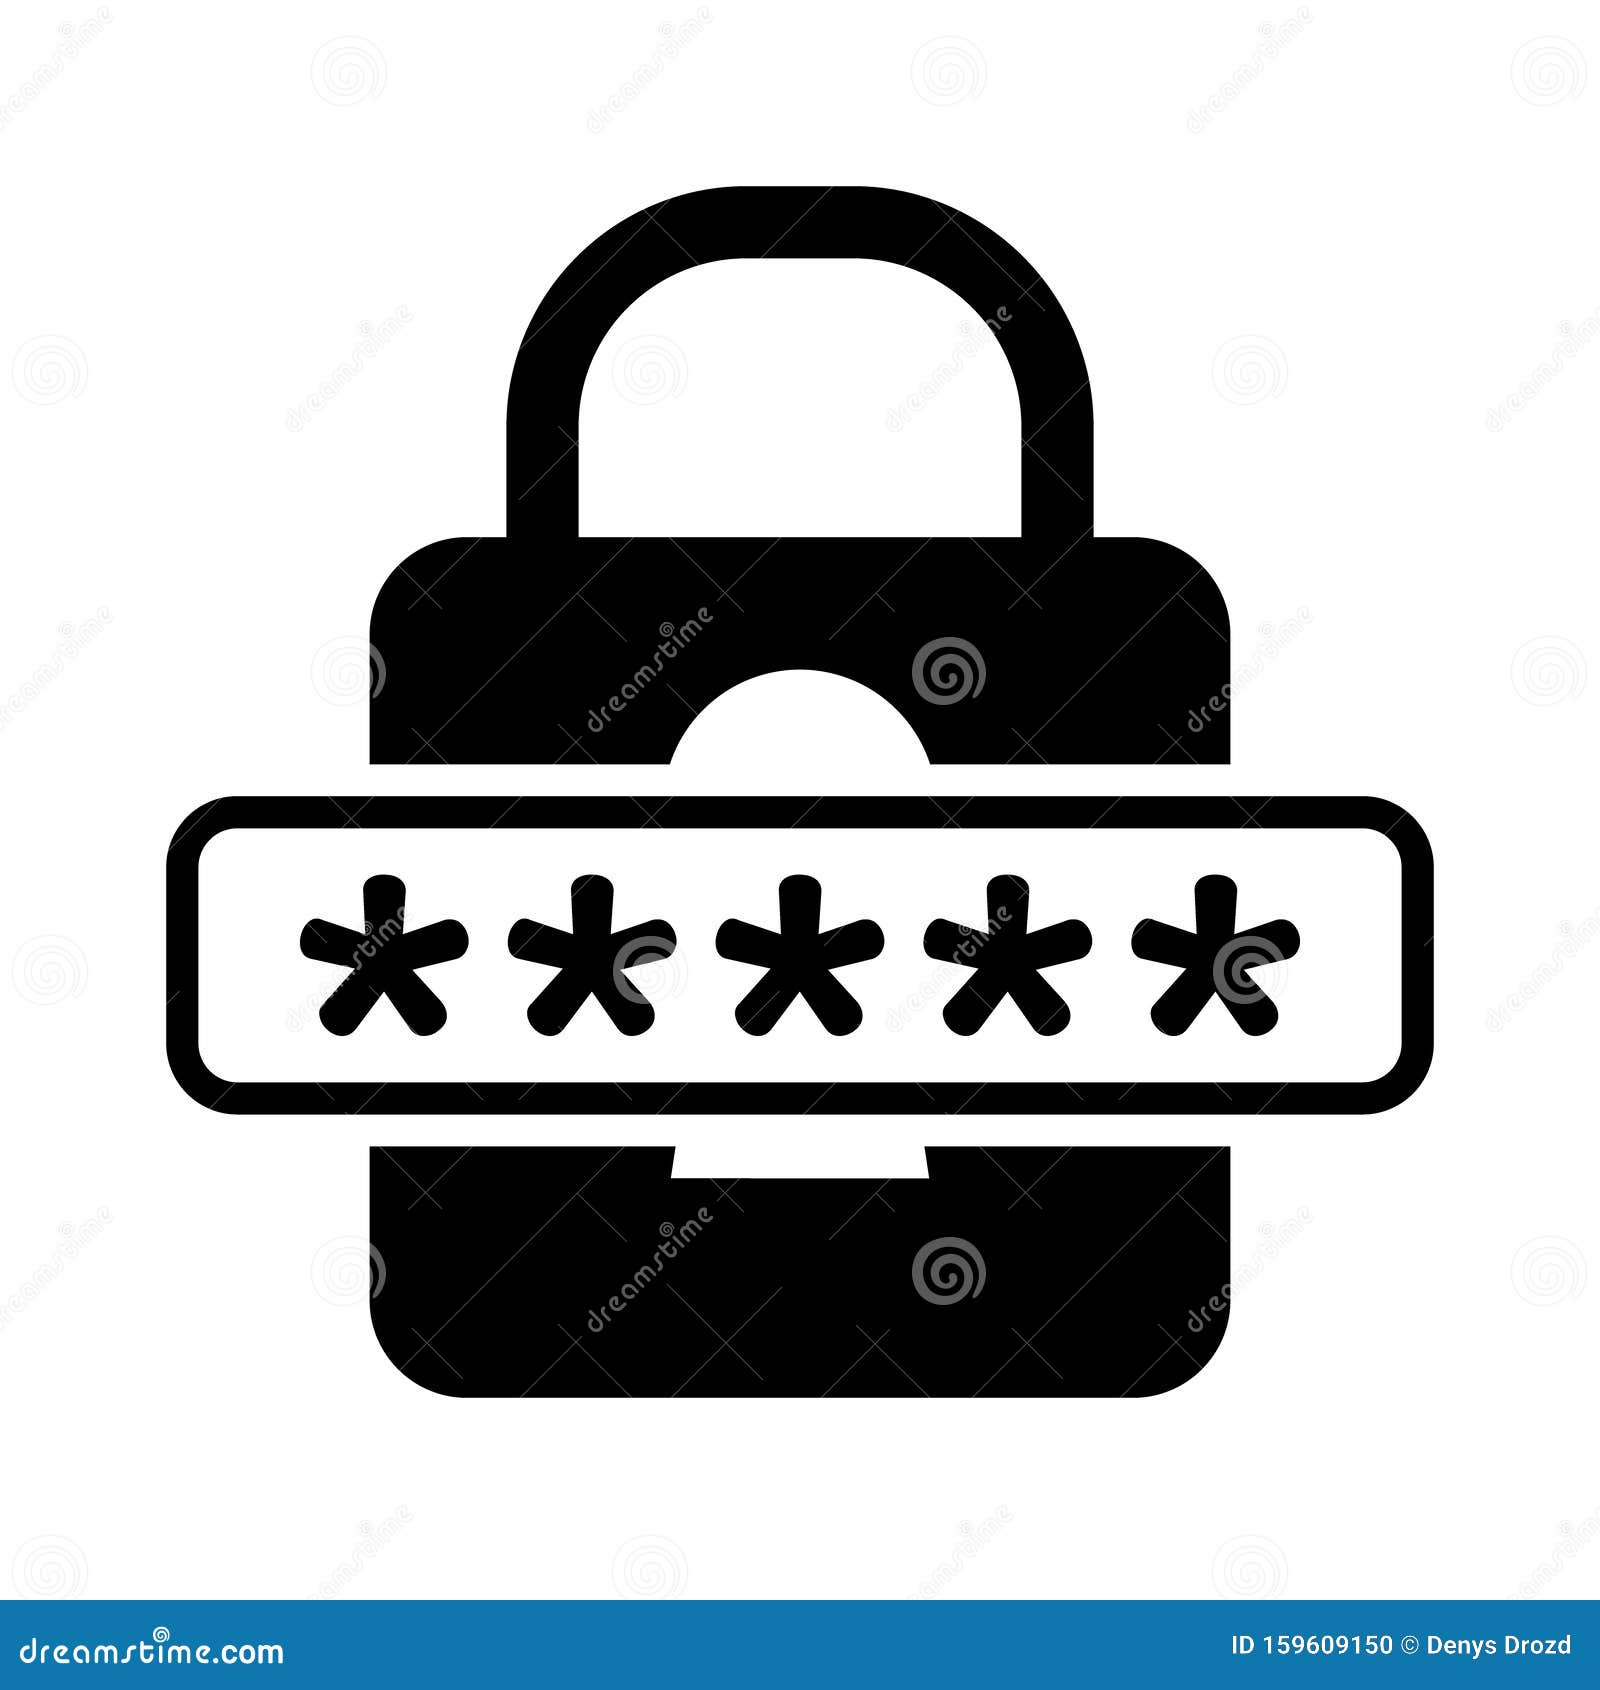 Security vector icon. password illustration symbol. access sign or logo. For web sites or mobile.